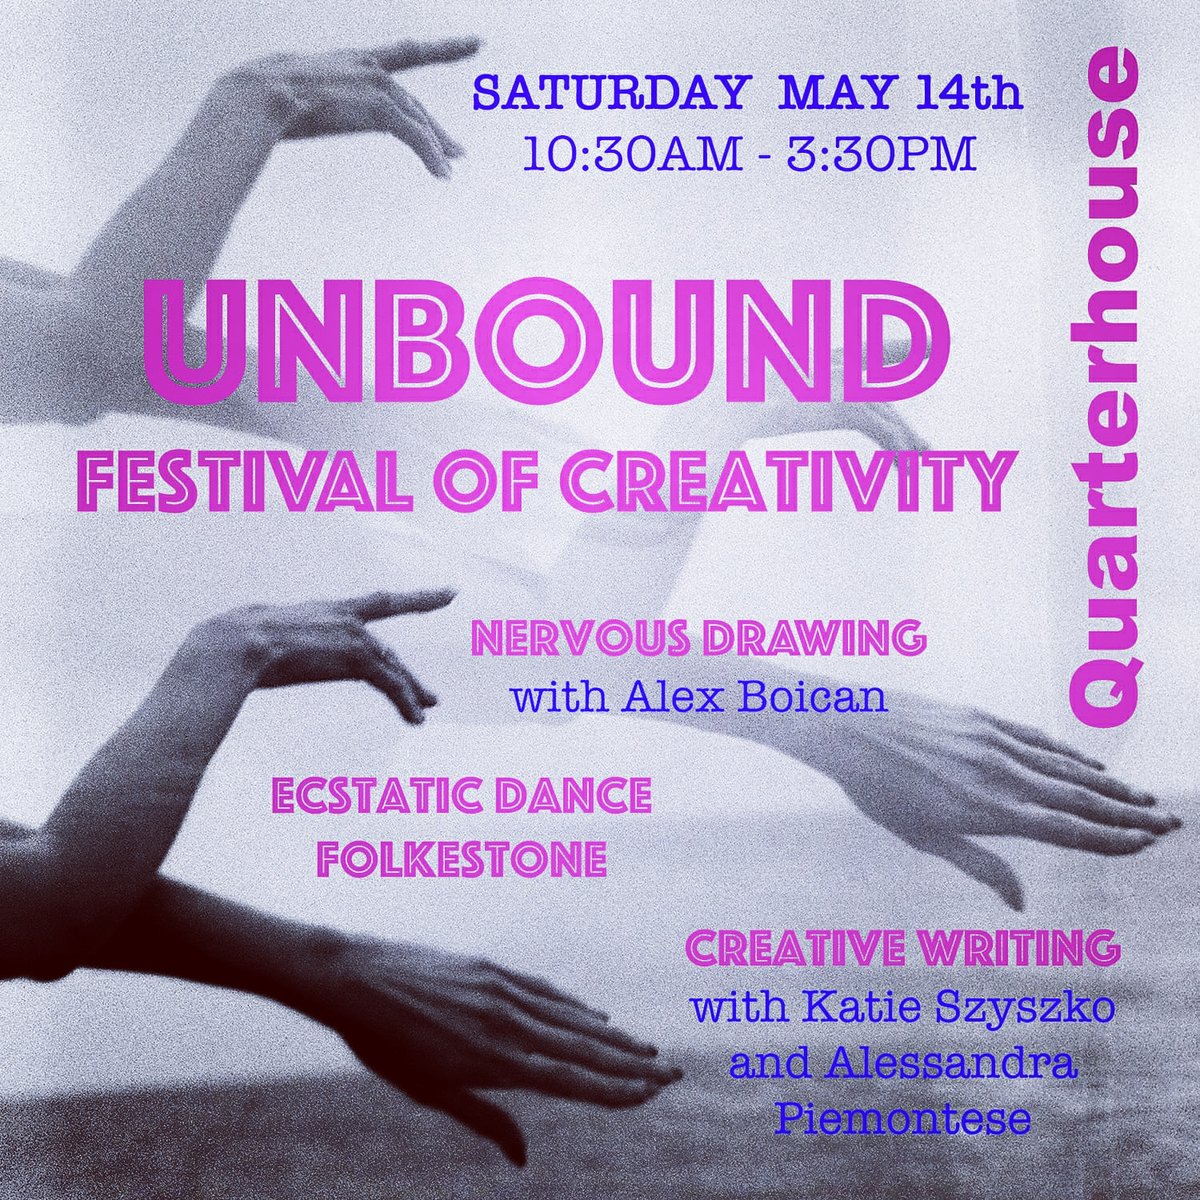 Join us for a day of embracing creativity. Ecstatic Dance.Nervous Drawing. Creative Writing.Experience the joyful playfulness of creative exploration. 14th May at @Quarterhouse_UK See tickets here:eventbrite.co.uk/e/unbound-fest… #folkestone @folkelife @CreativeFstone @CeneMagazine